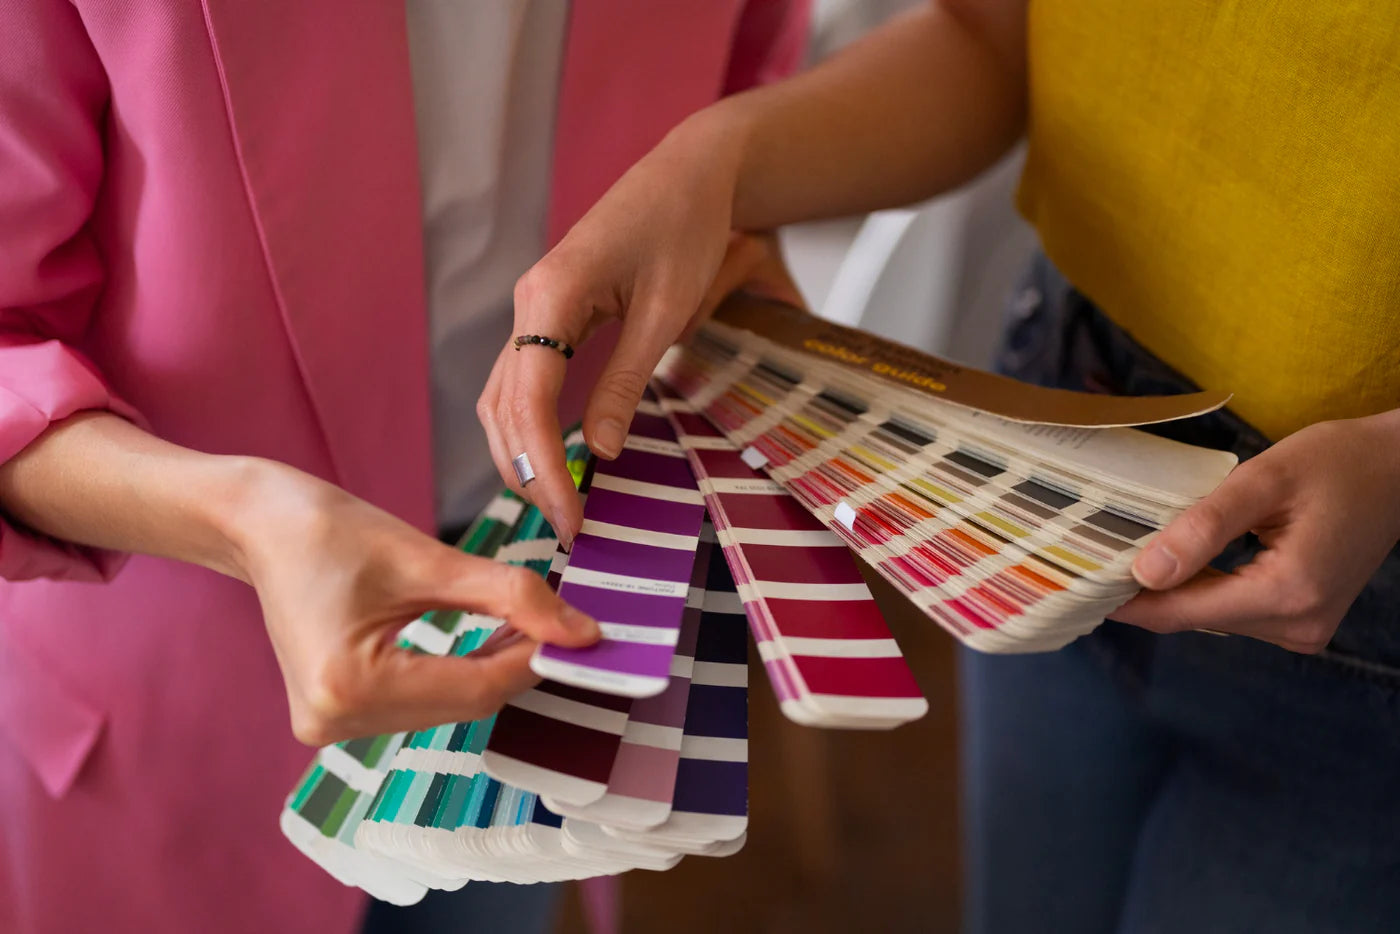 The Psychology of Color in Fashion